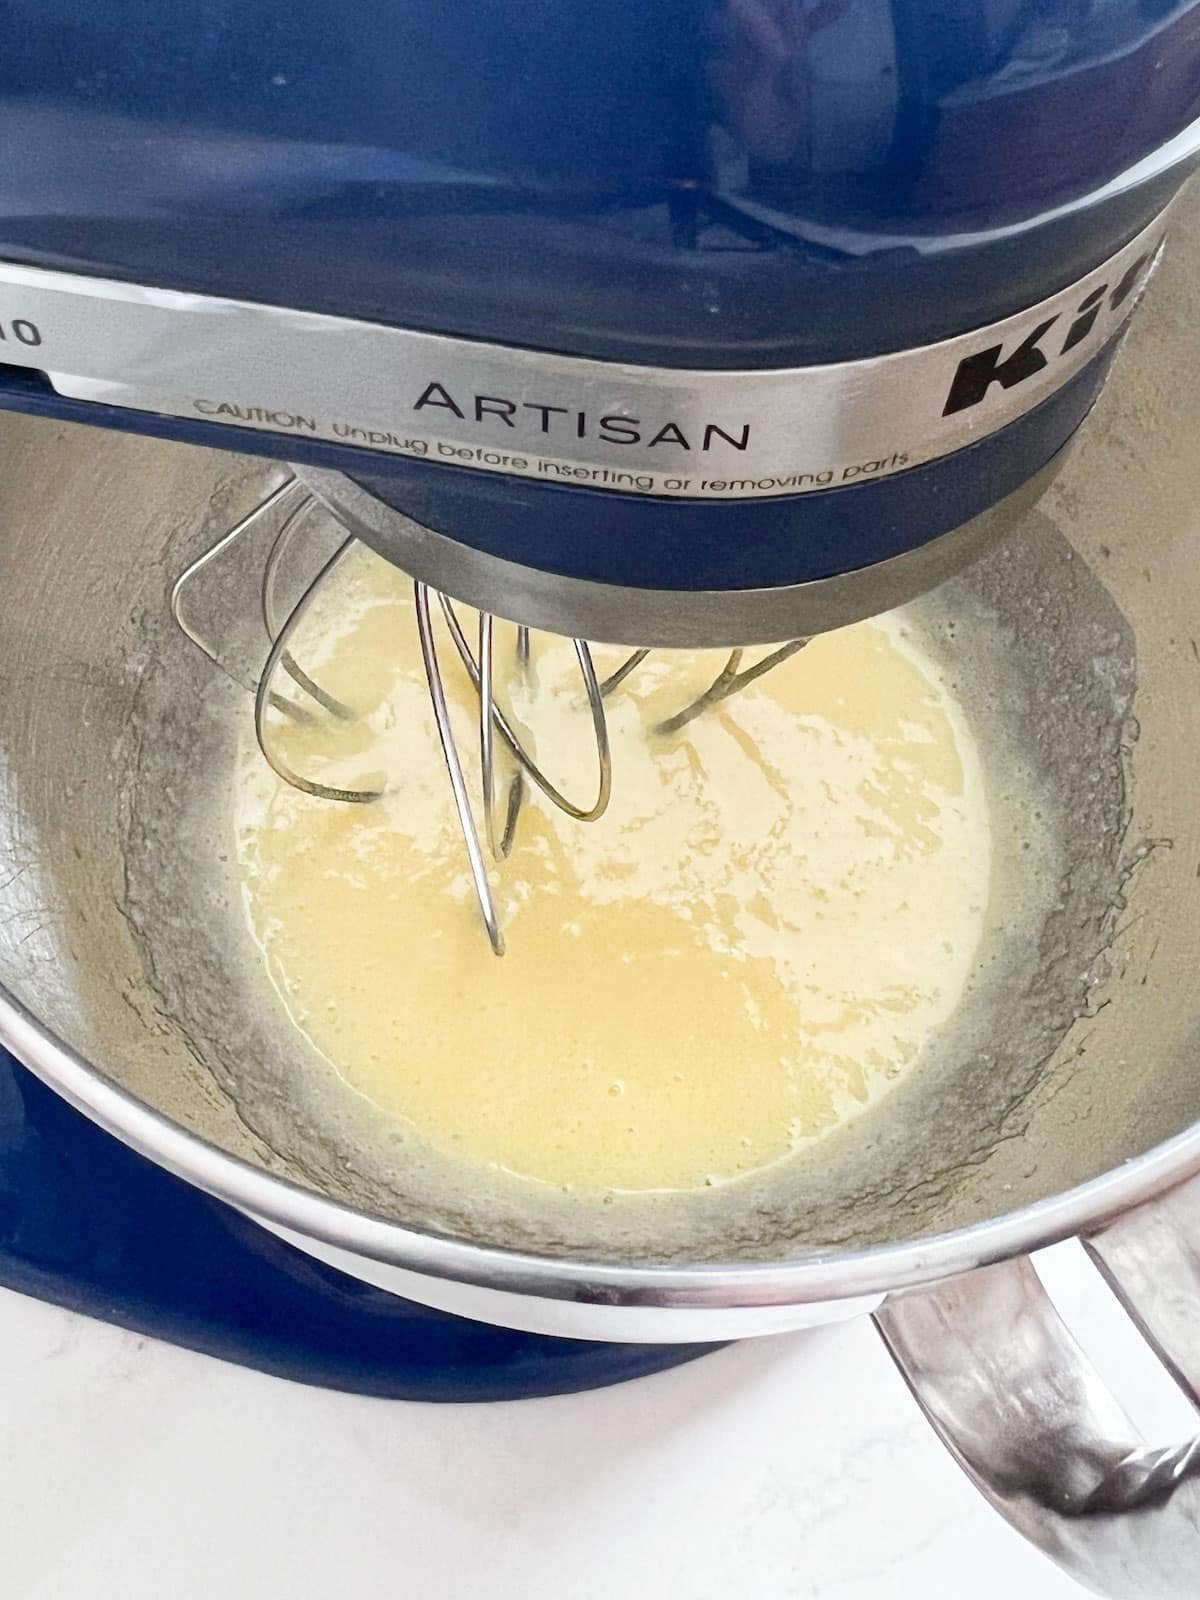 Lemon curd being mixed in a blue stand mixer.